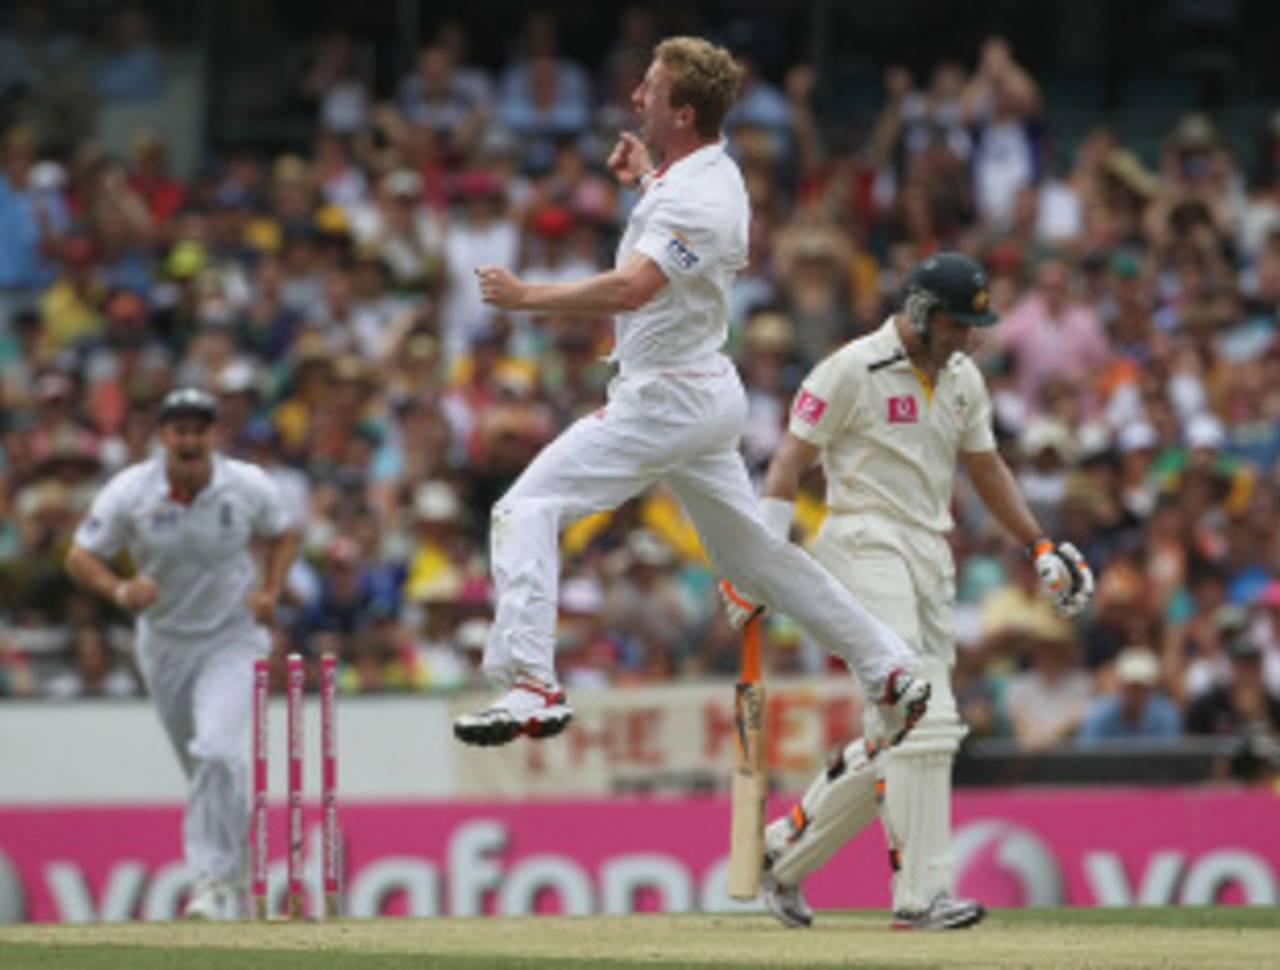 Paul Collingwood was ecstatic to remove Michael Hussey the last ball before the new ball was due, Australia v England, 5th Test, Sydney, 2nd day, January 4, 2011